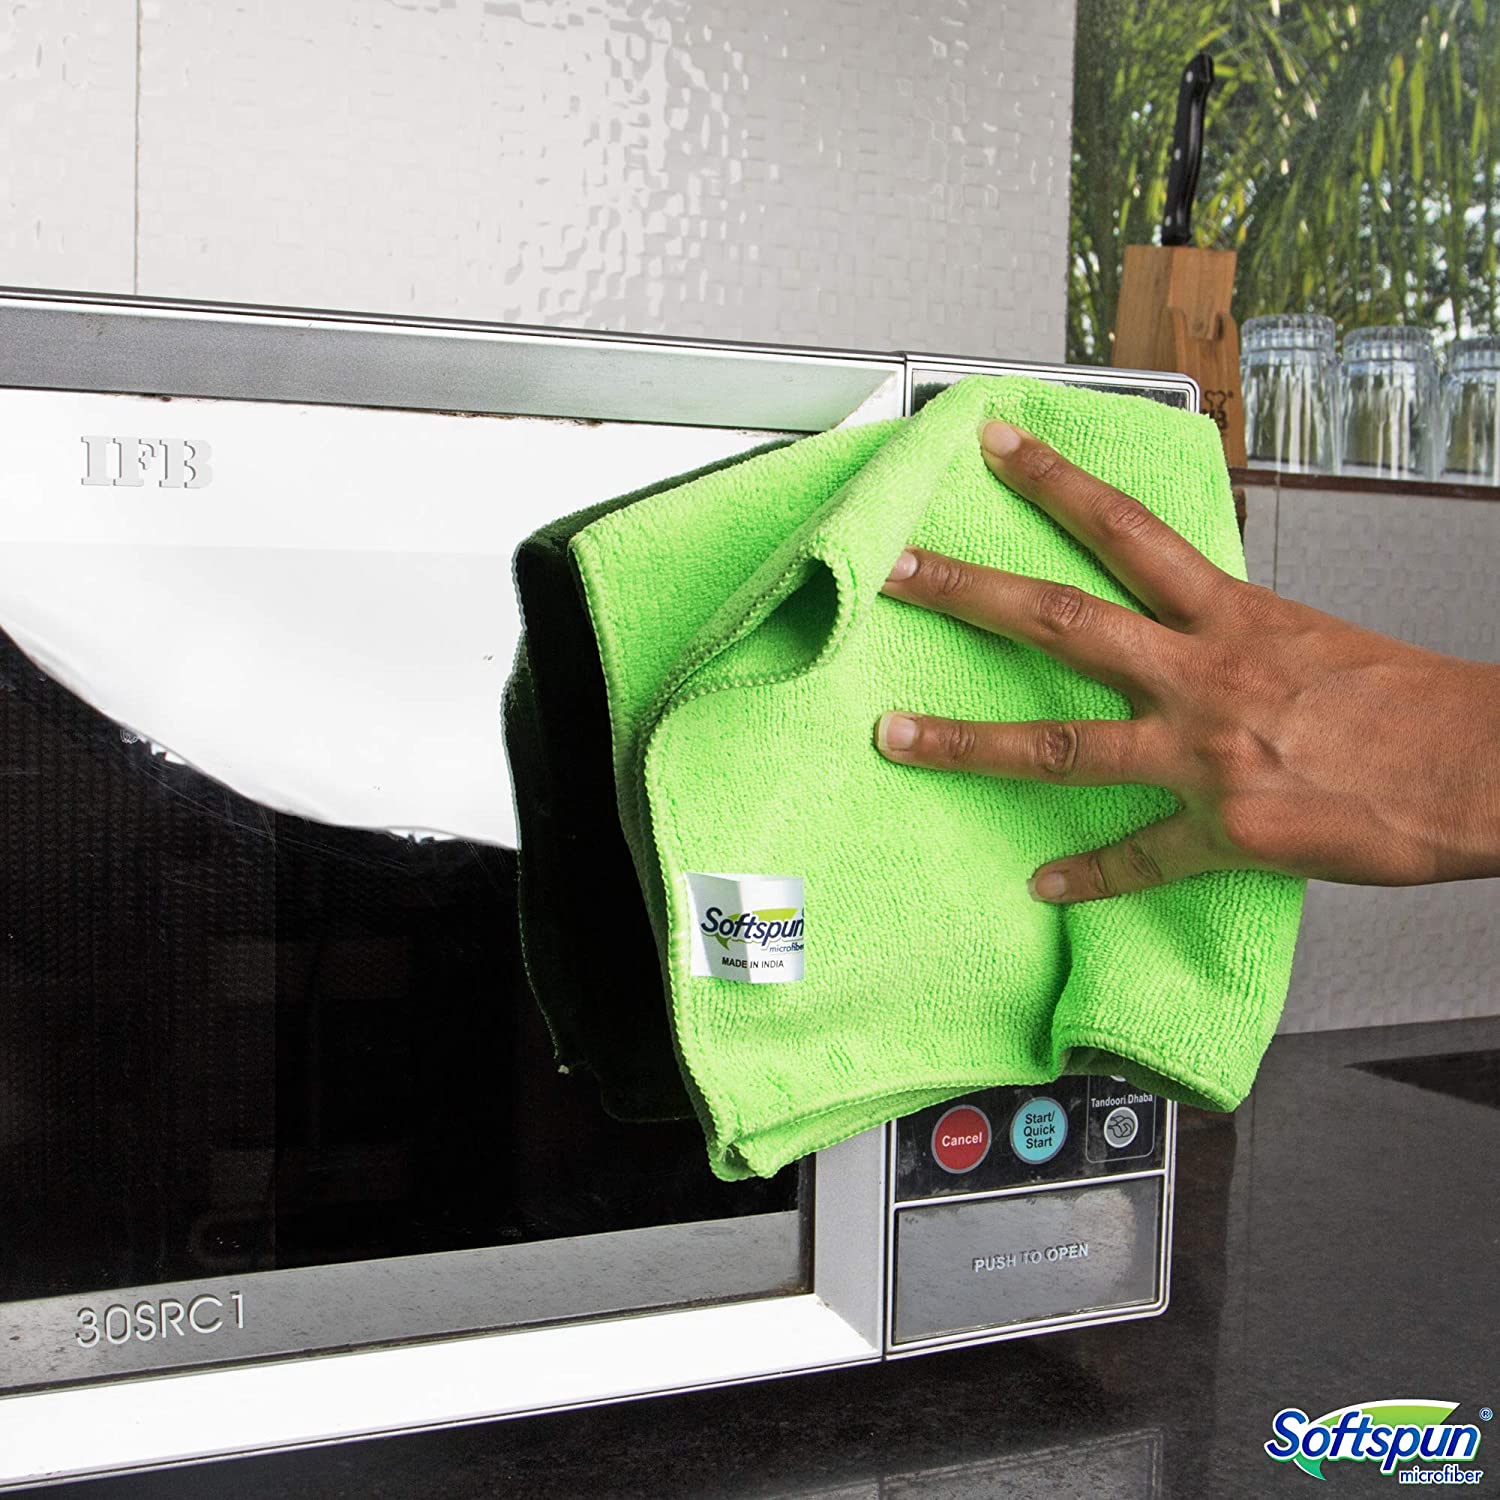 Microwave being cleaned with Microfiber Cleaning Cloth